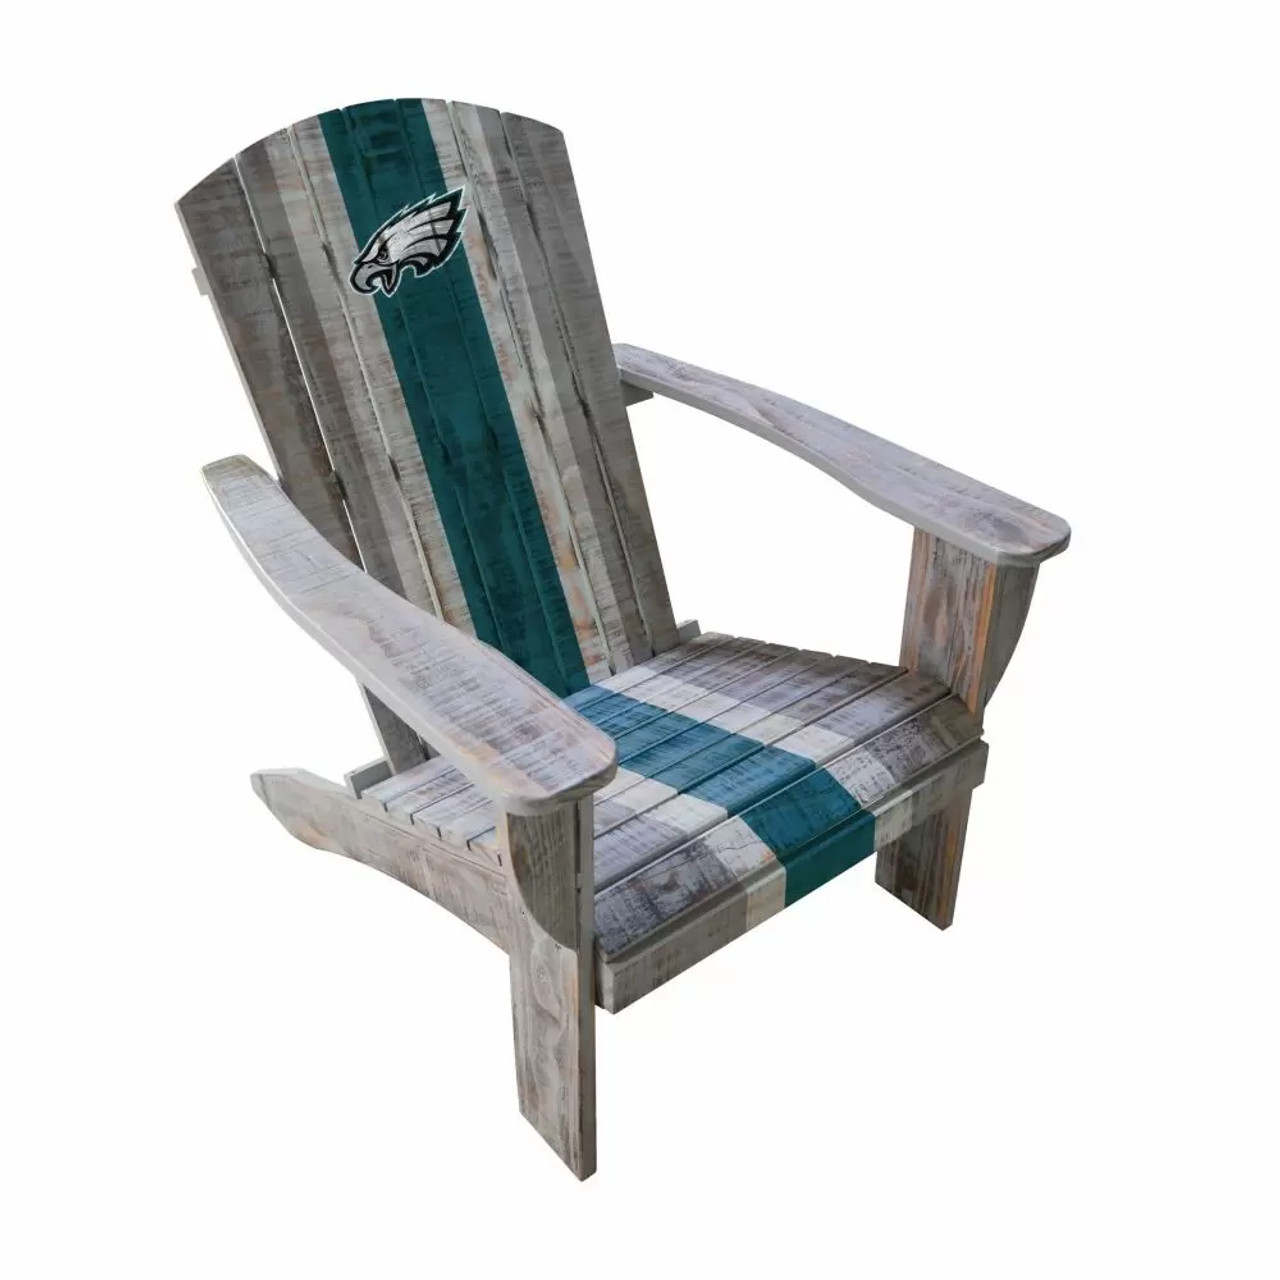 511-1037, Philadelphia, Philly, Eagles, Wood, Adirondack, Chair, NFL, Imperial, FREE SHIPPING, 720801110370